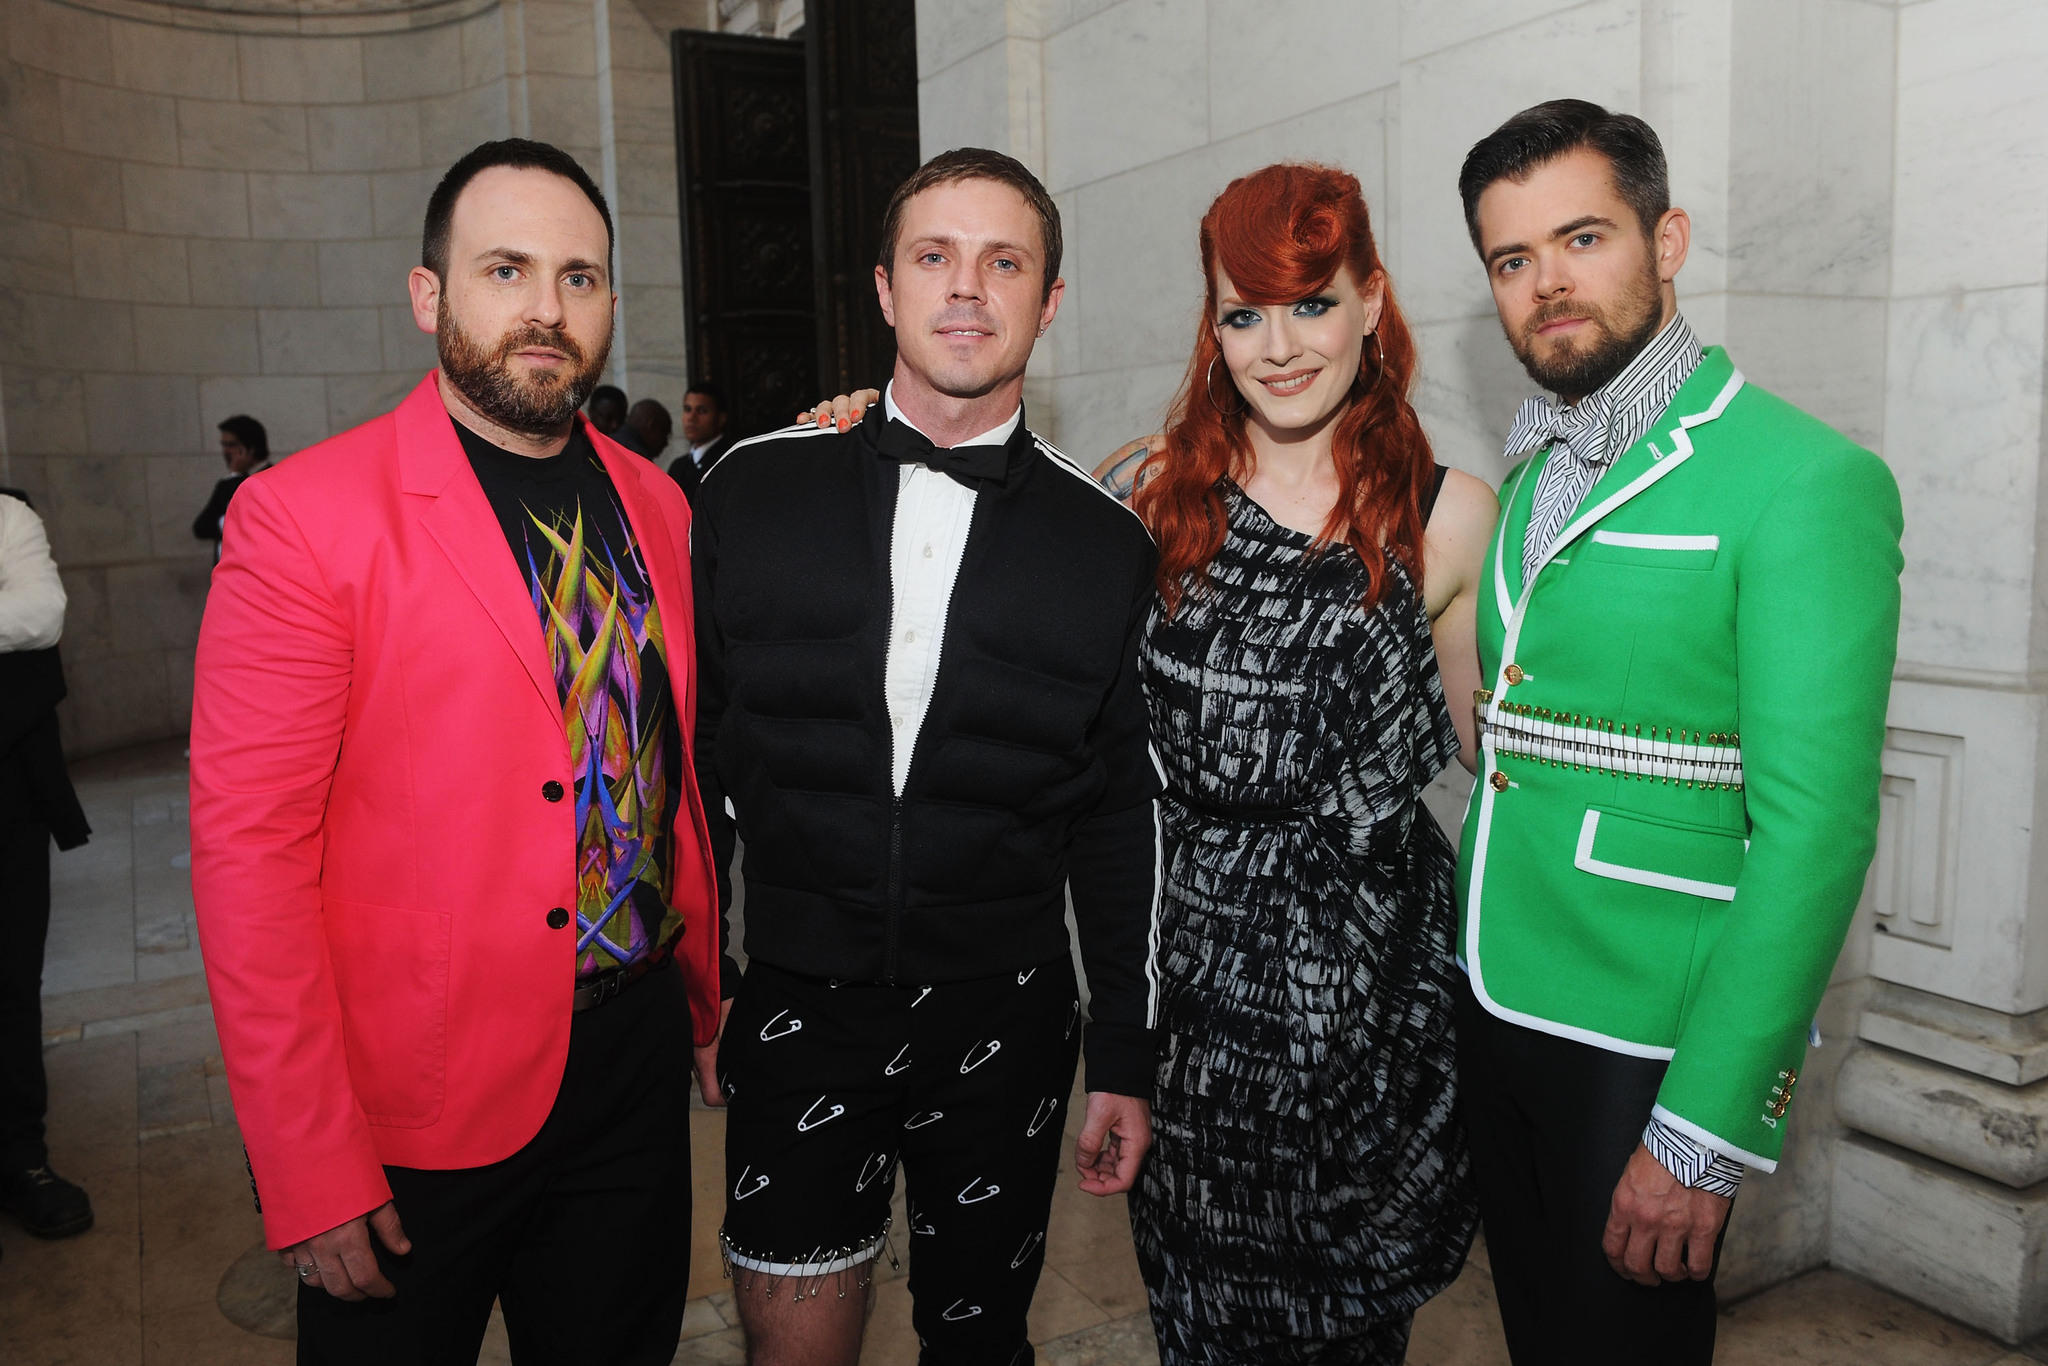 Jake Shears, Ana Matronic, Scissor Sisters, Babydaddy and Del Marquis